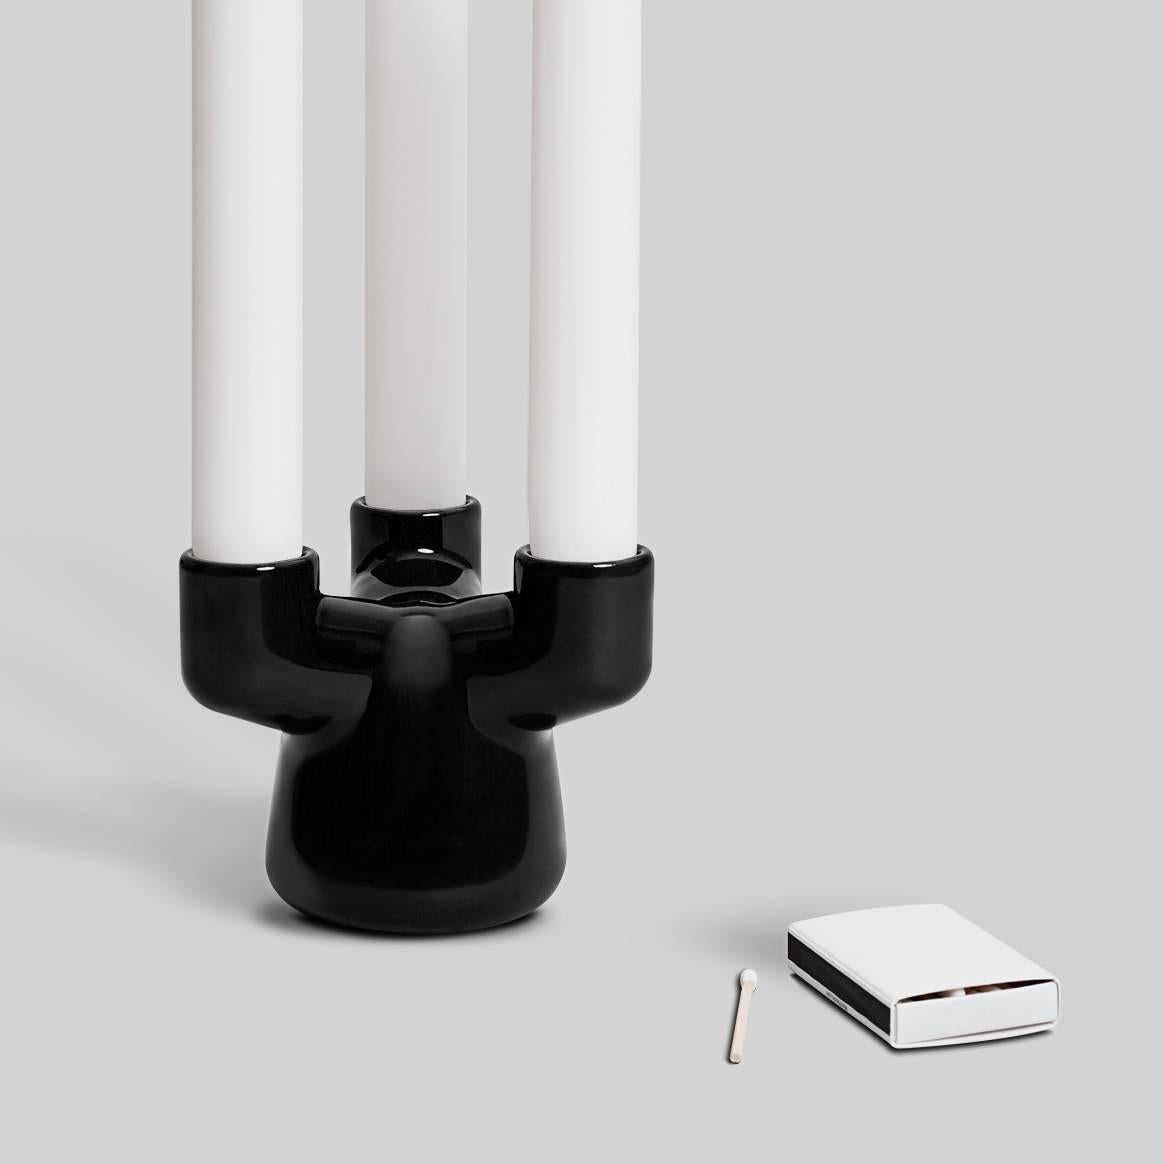 The EE Candleholder tells its own origin story. Inspired by the way that growth is expressed in nature, the candleholder's layers of digitally printed grain act like the rings in trees or layers of rock: they reflect the process required to create